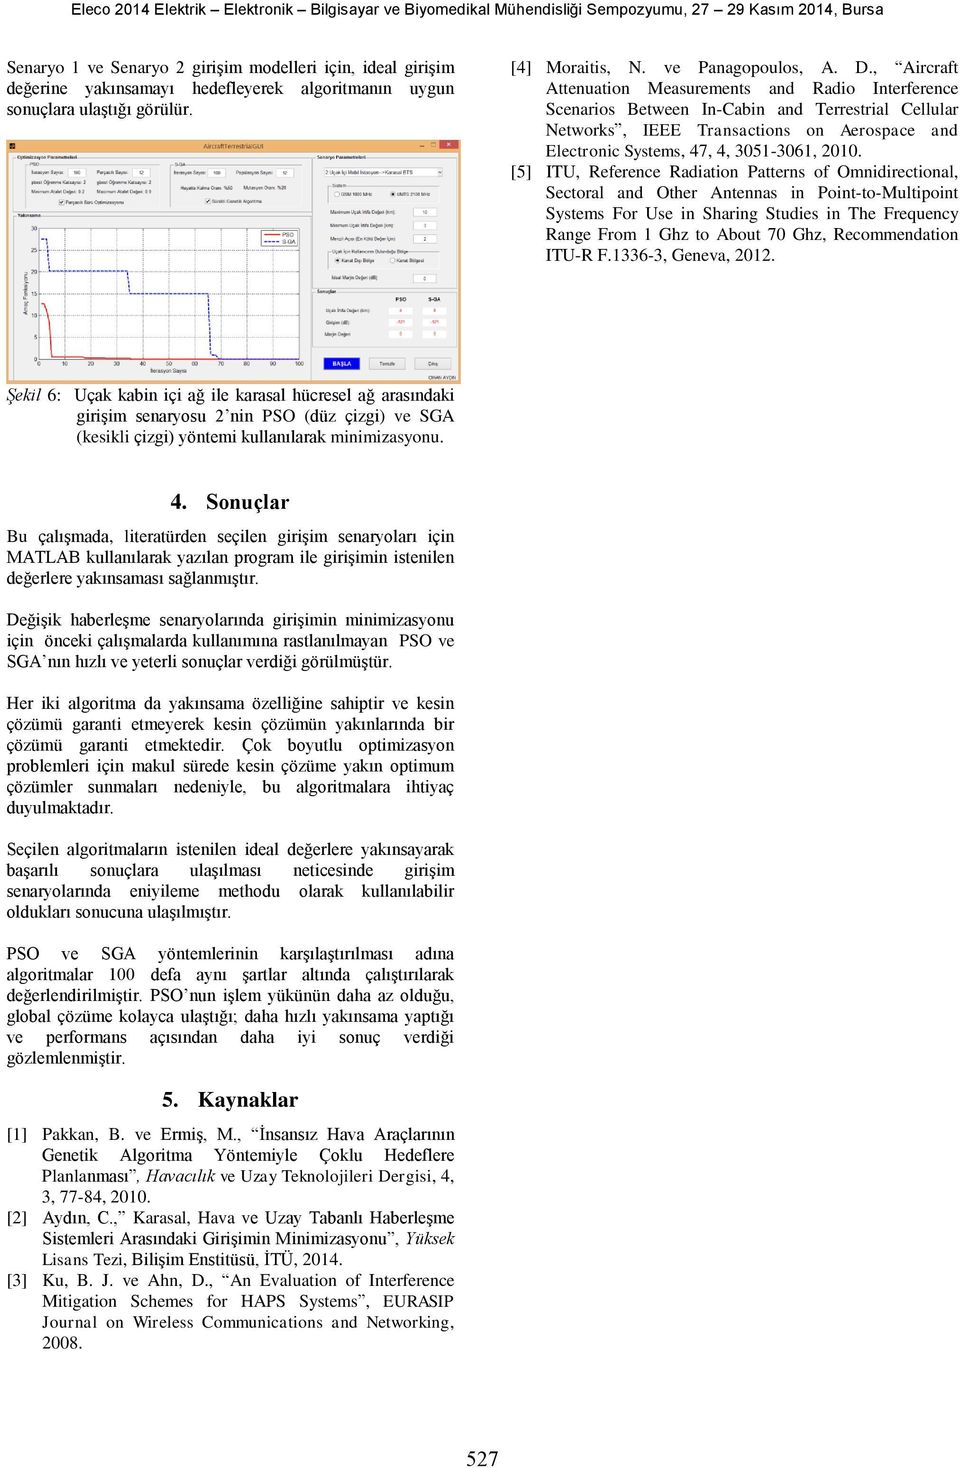 [5] ITU, Reference Radaton atterns of Omndrectonal, ectoral and Other Antennas n ont-to-ultpont ystems For Use n harng tudes n The Frequency Range From 1 hz to About 70 hz, Recommendaton ITU-R F.